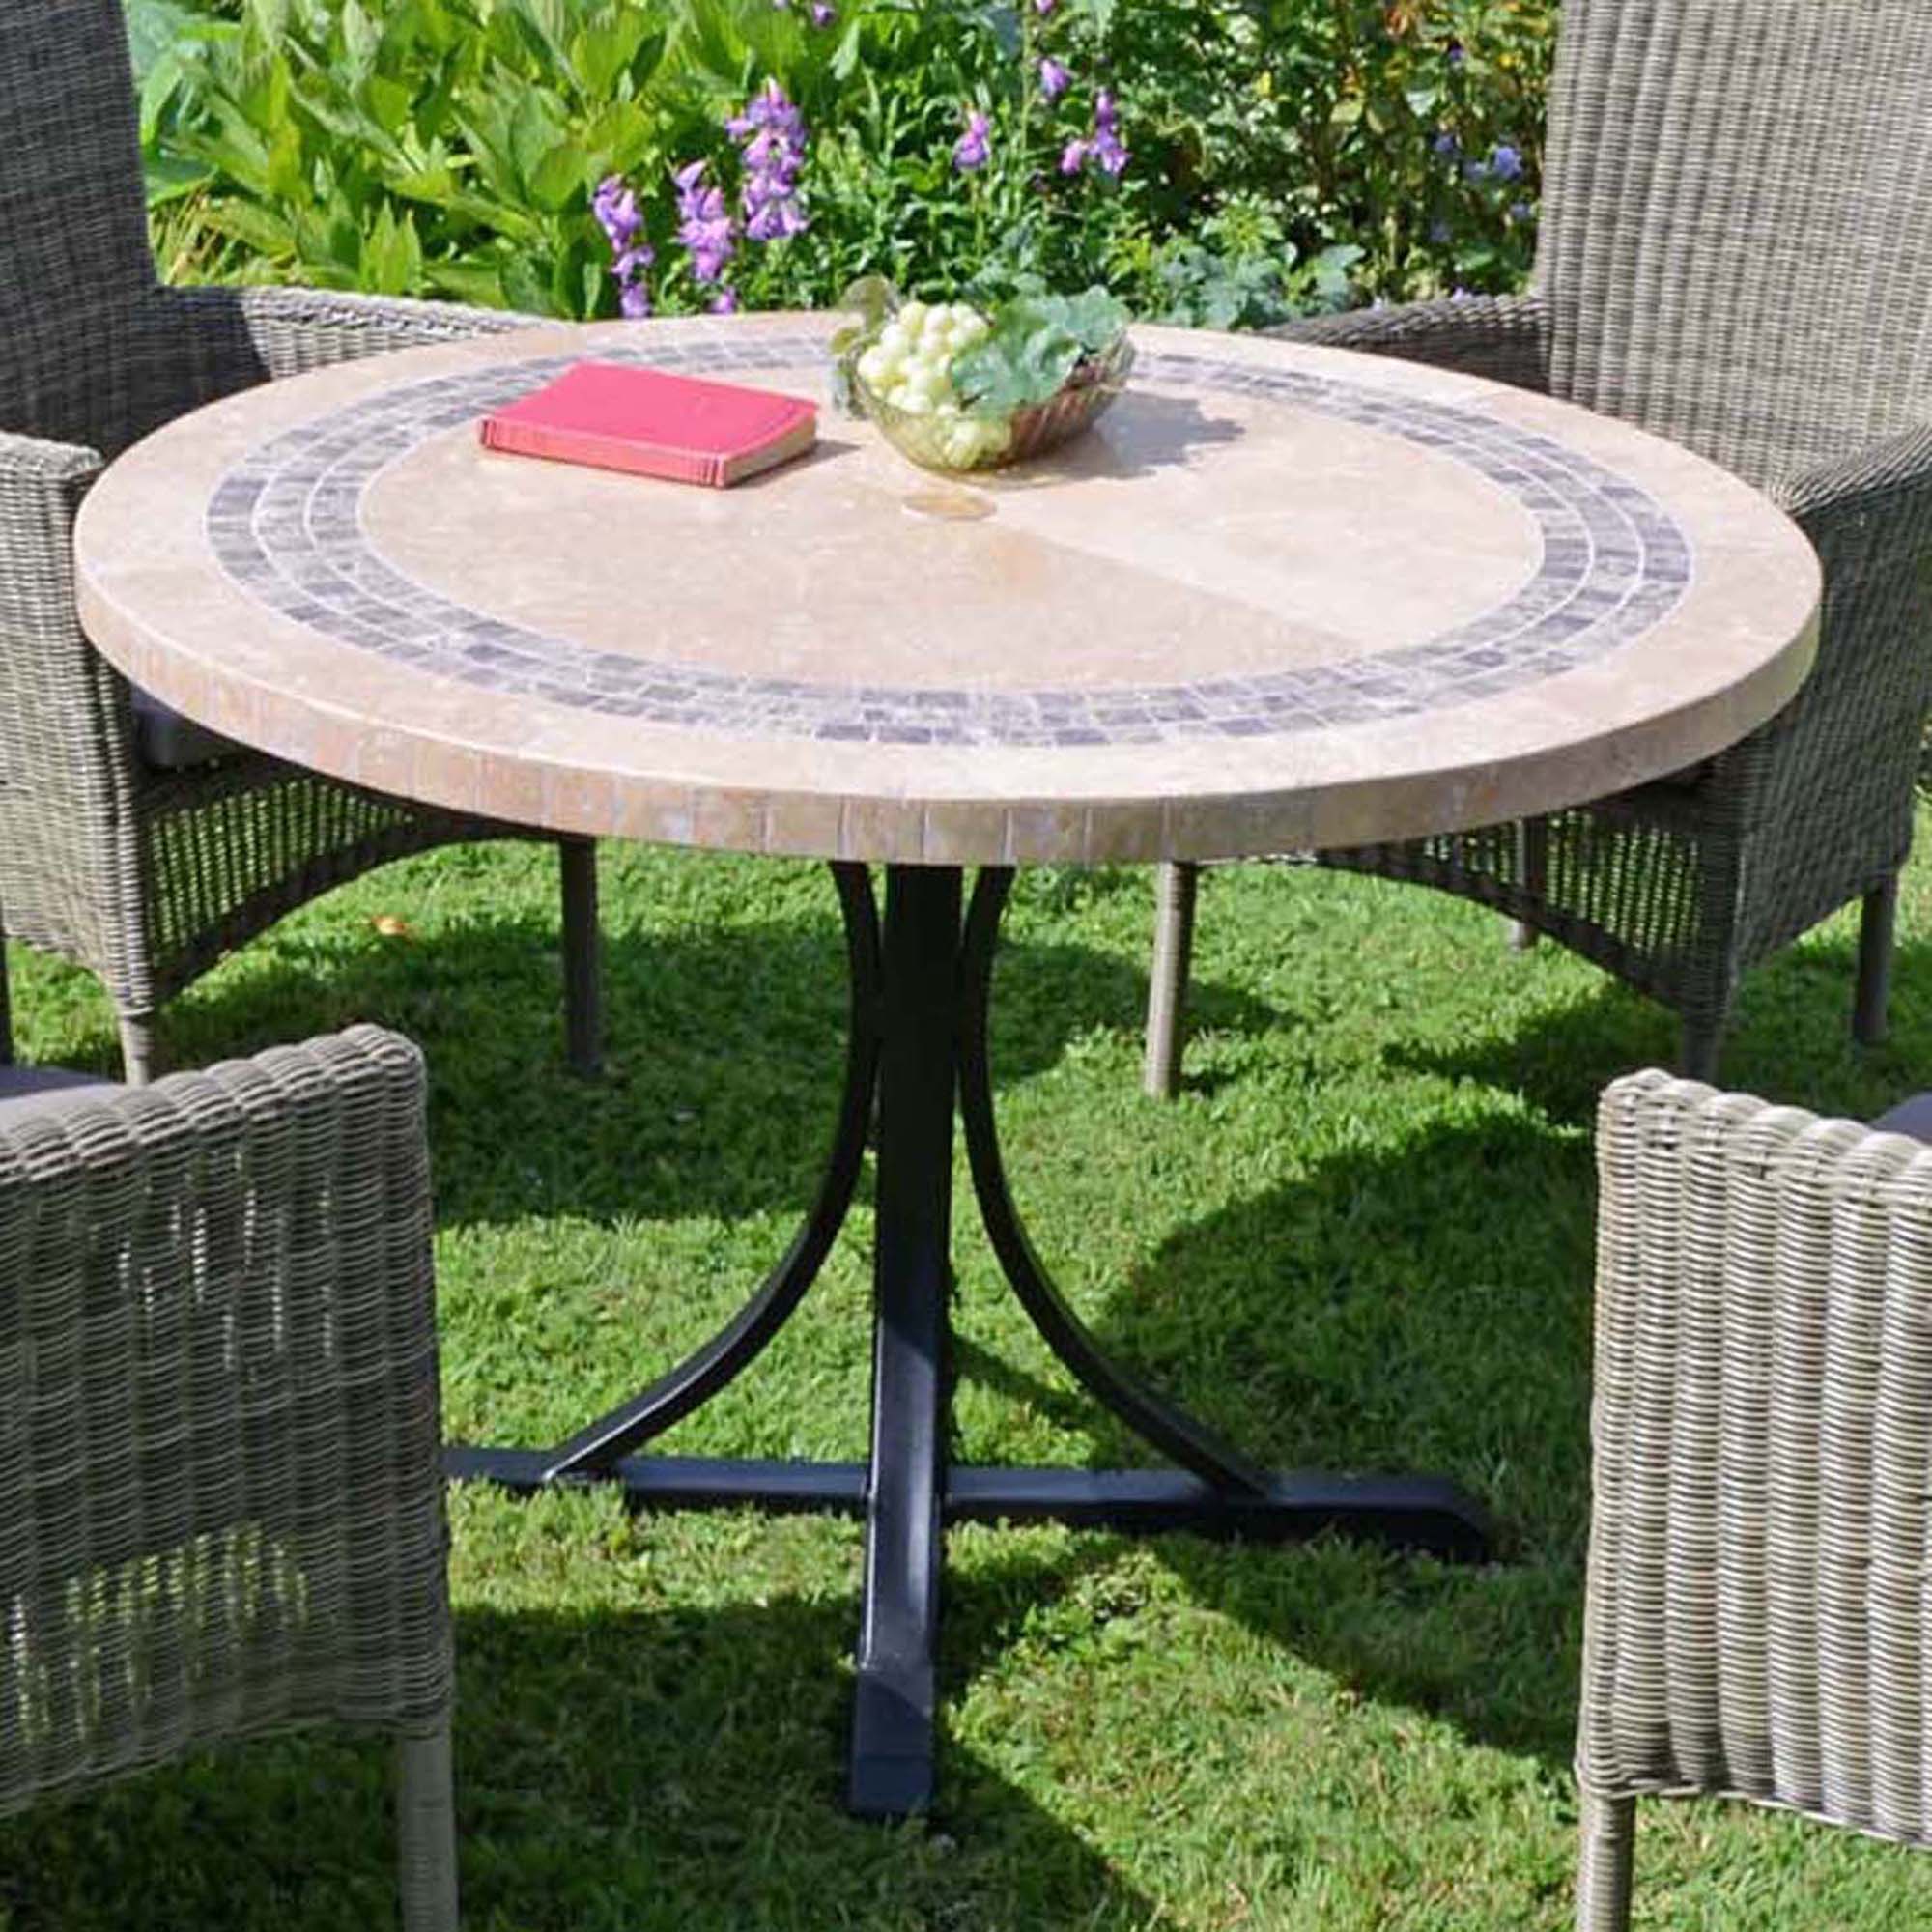 Byron Manor Vermont Stone Mosaic Garden Dining Table with 4 Stockholm Black Wicker Chairs Dining Sets Byron Manor   